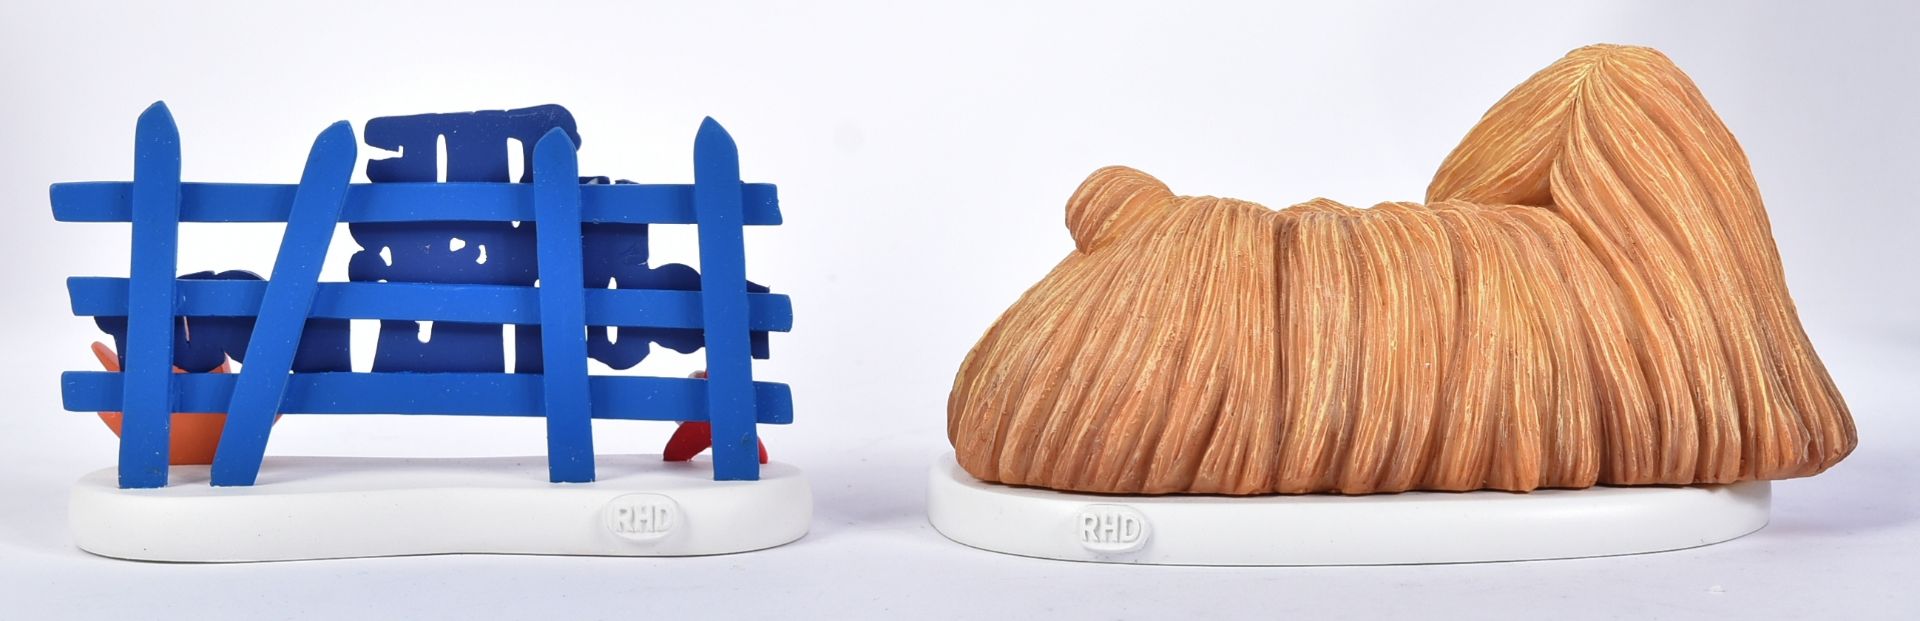 THE MAGIC ROUNDABOUT - ROBERT HARROP - FIGURINES / STATUES - Image 4 of 5